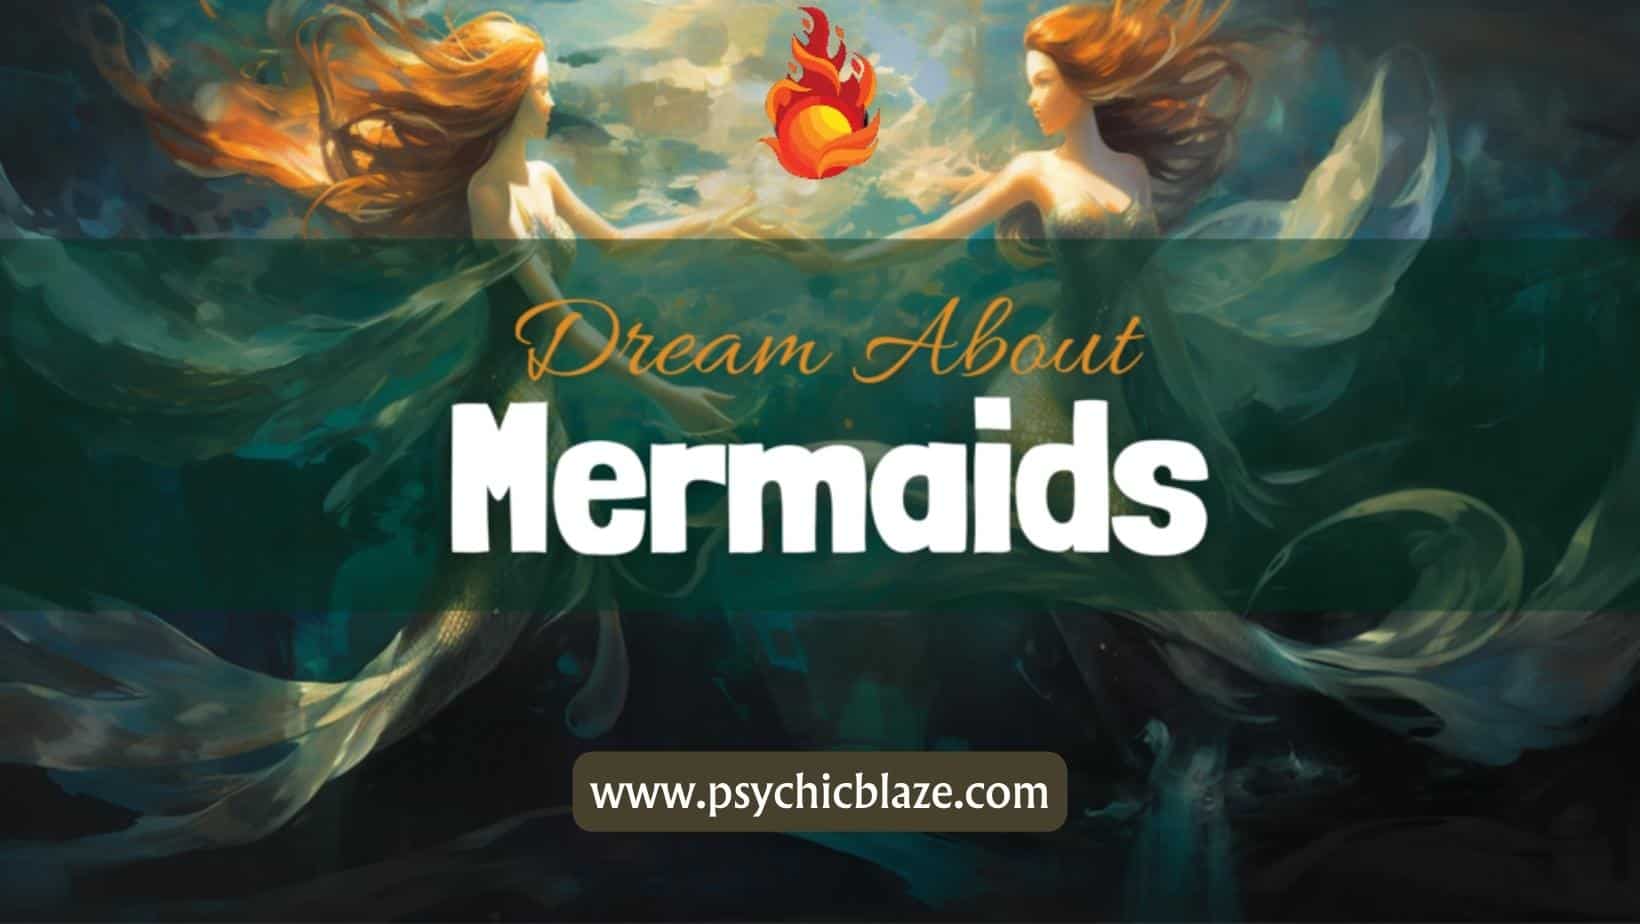 Dream about Mermaids